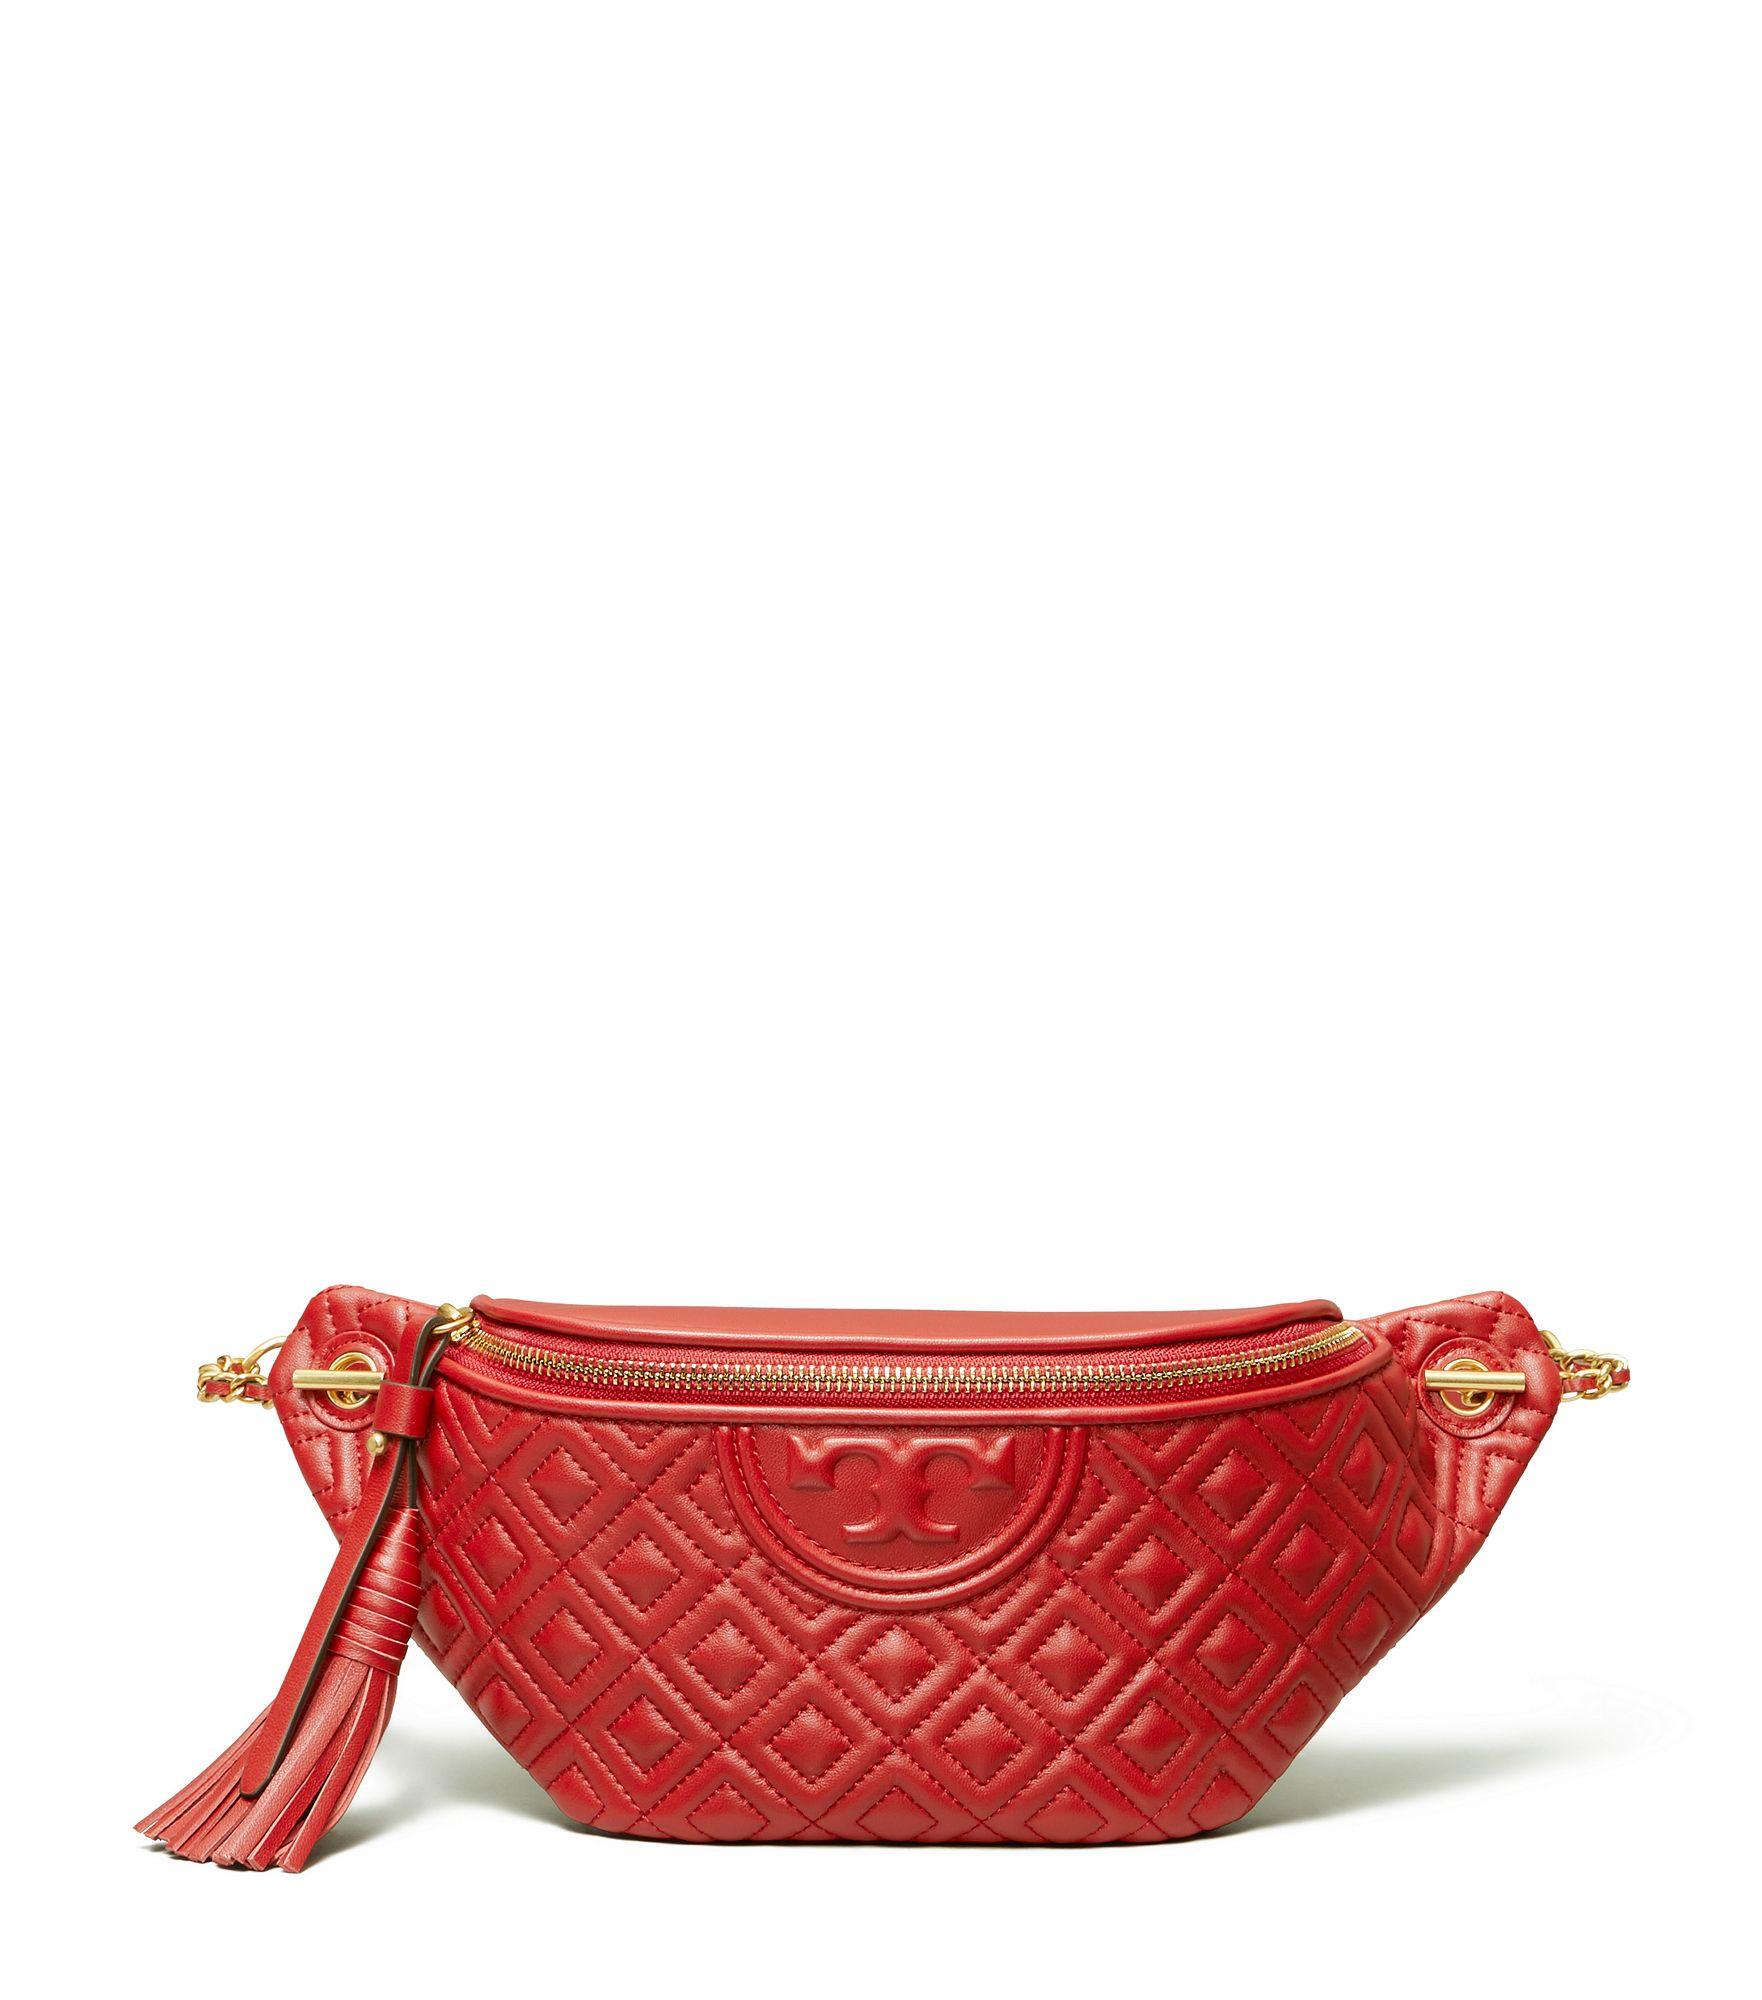 Tory Burch Leather Fleming Belt Bag in Red - Lyst